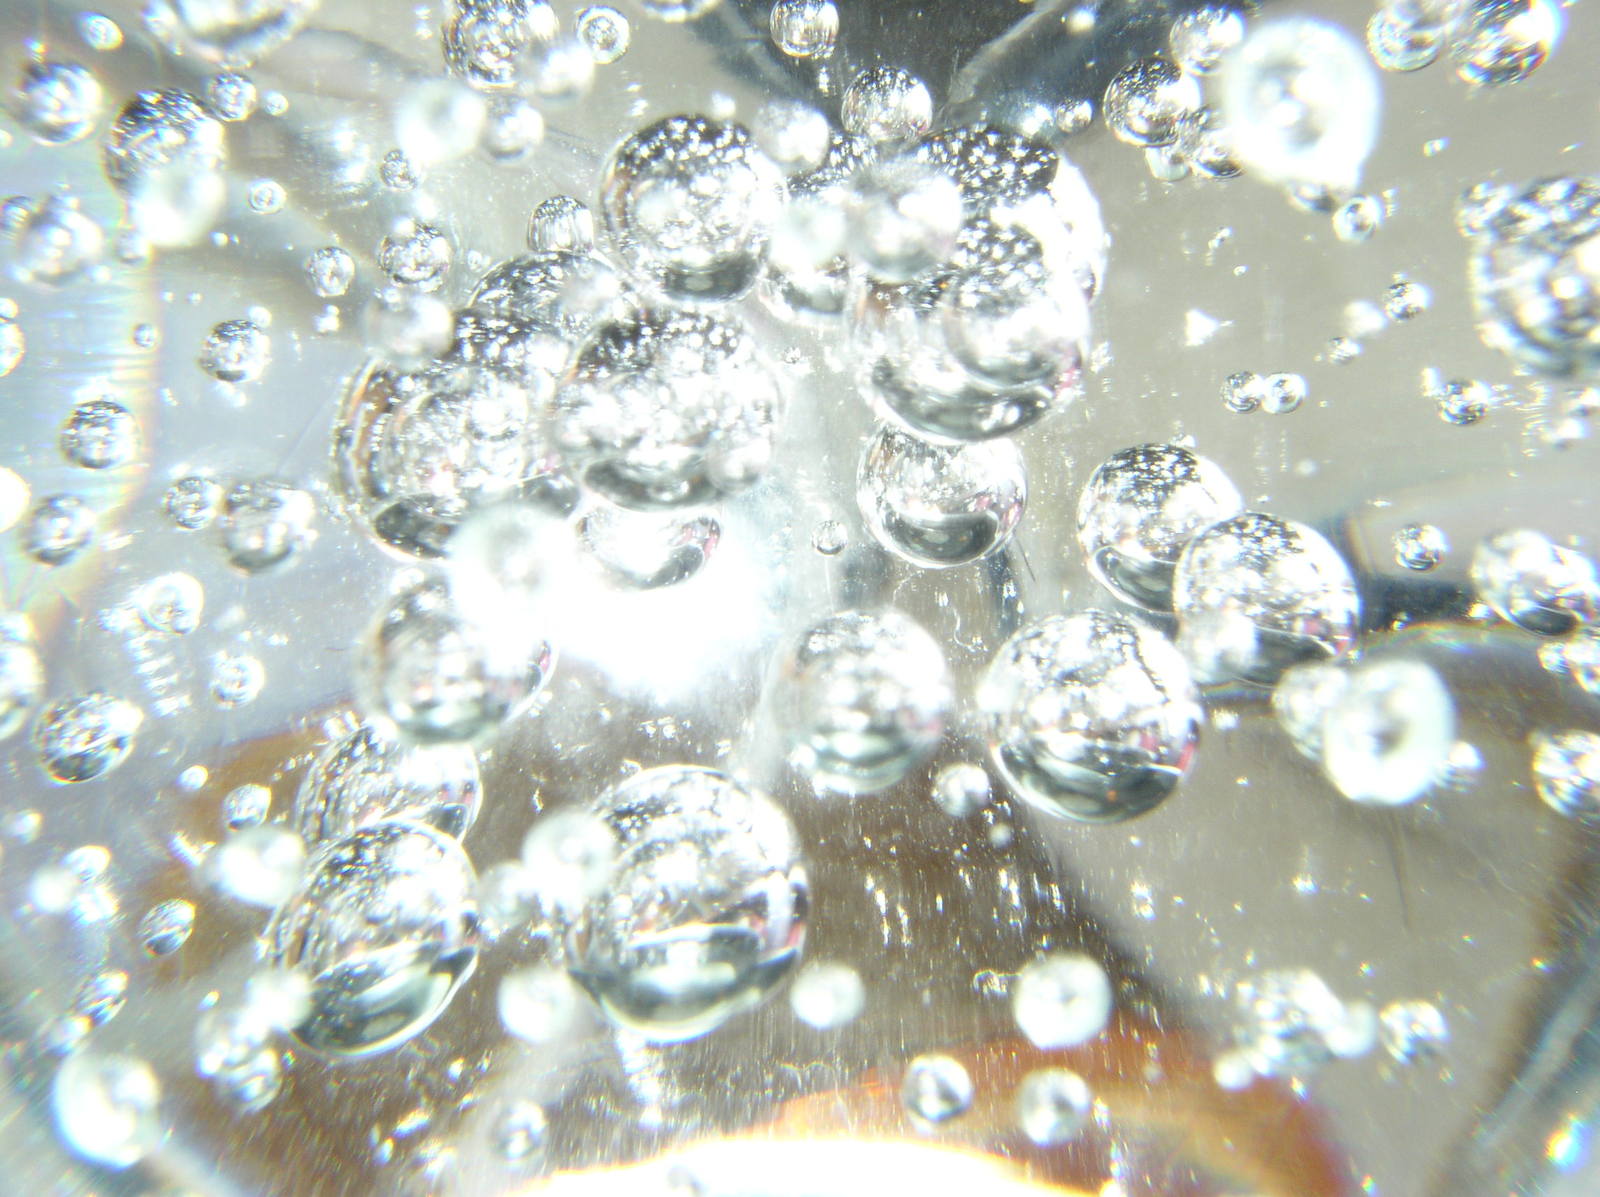 small crystals on a clear surface that is surrounded by water